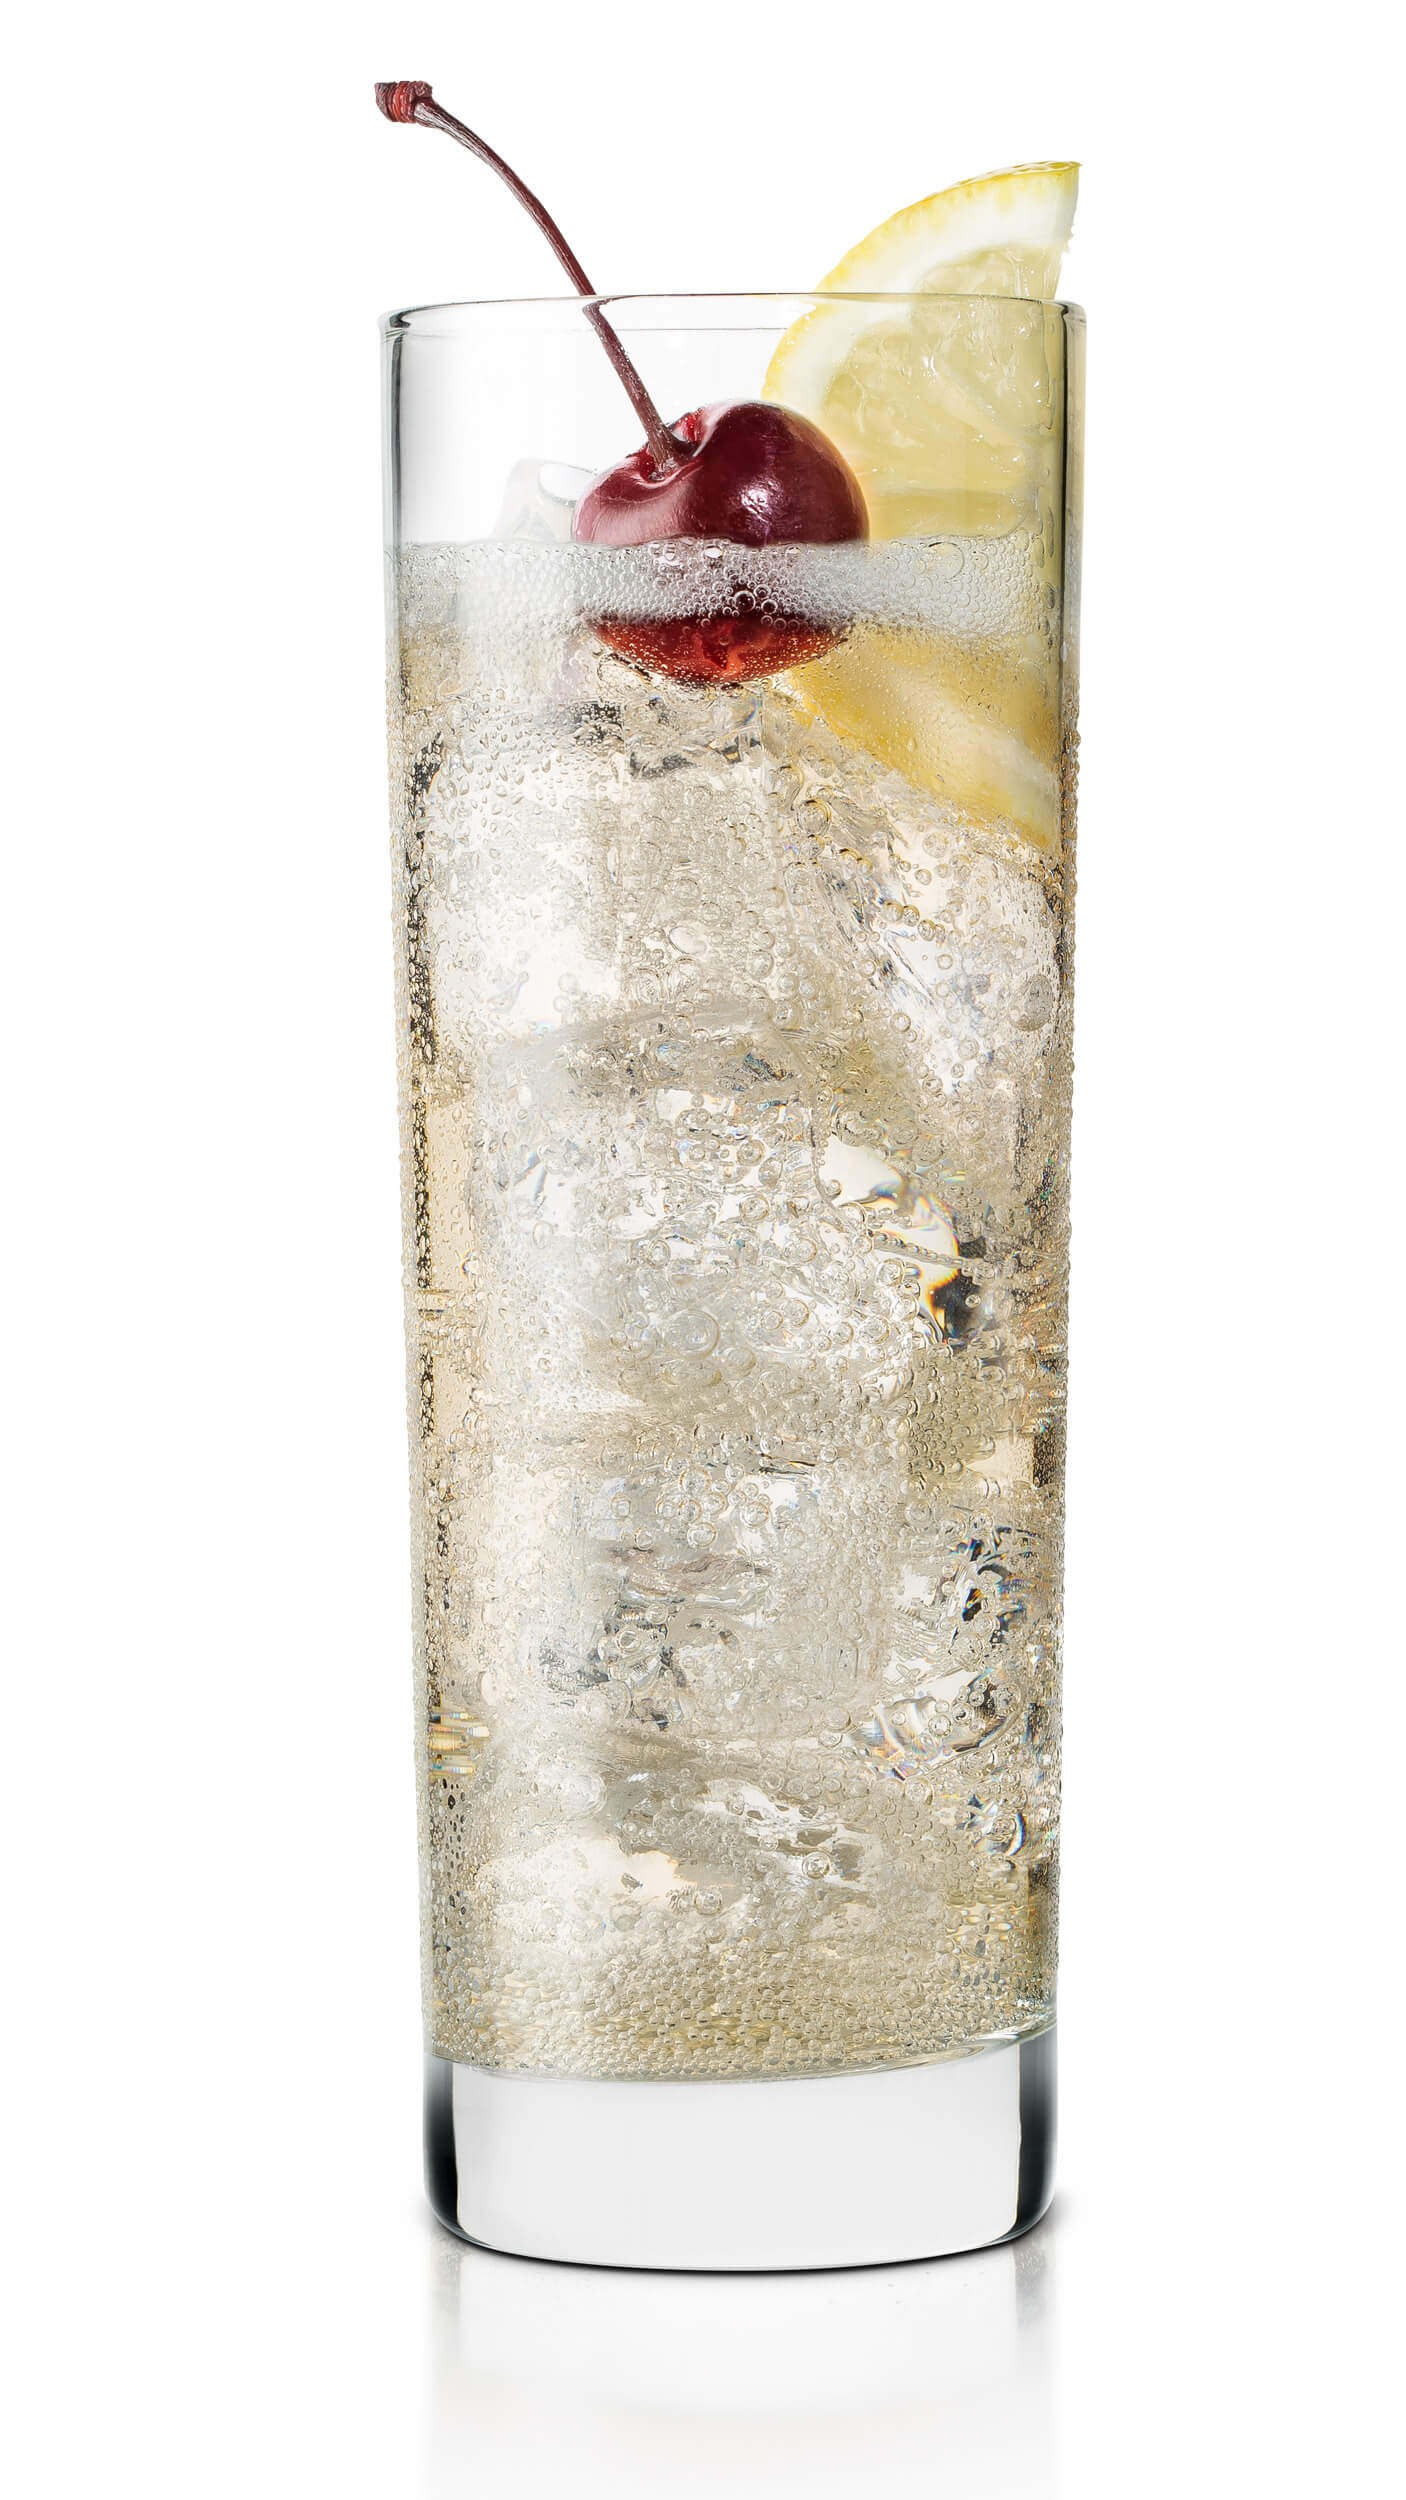 Ginger ale vodka with EFFEN Black Cherry and ginger ale. Citrusy and savory. Enjoy!